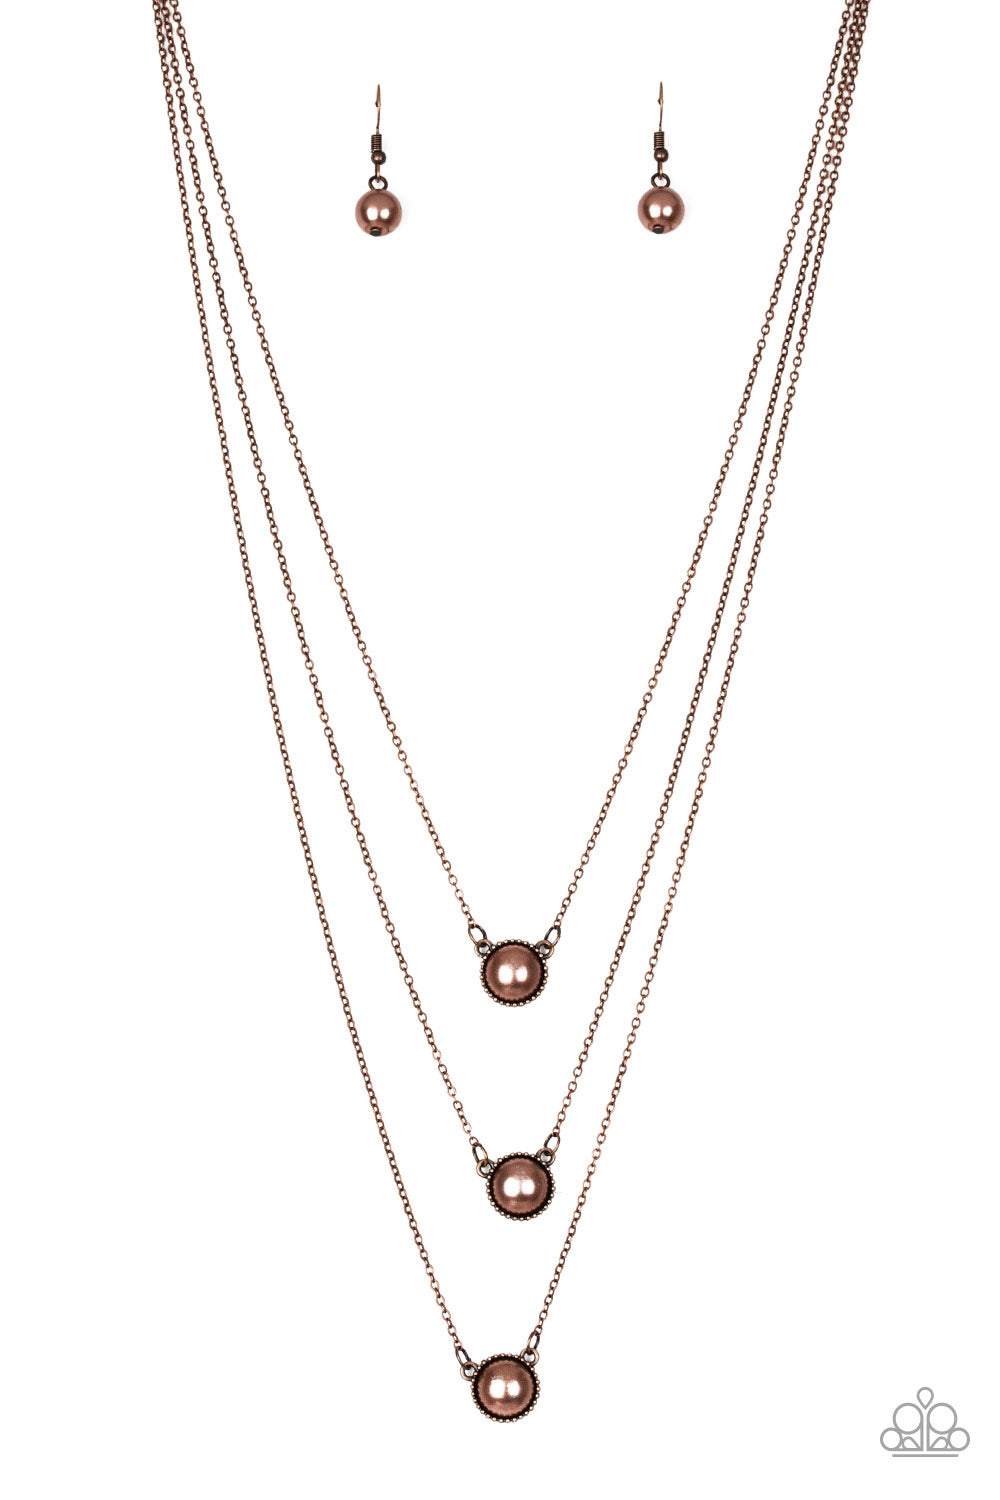 A Love For Luster - Copper Necklace Paparazzi